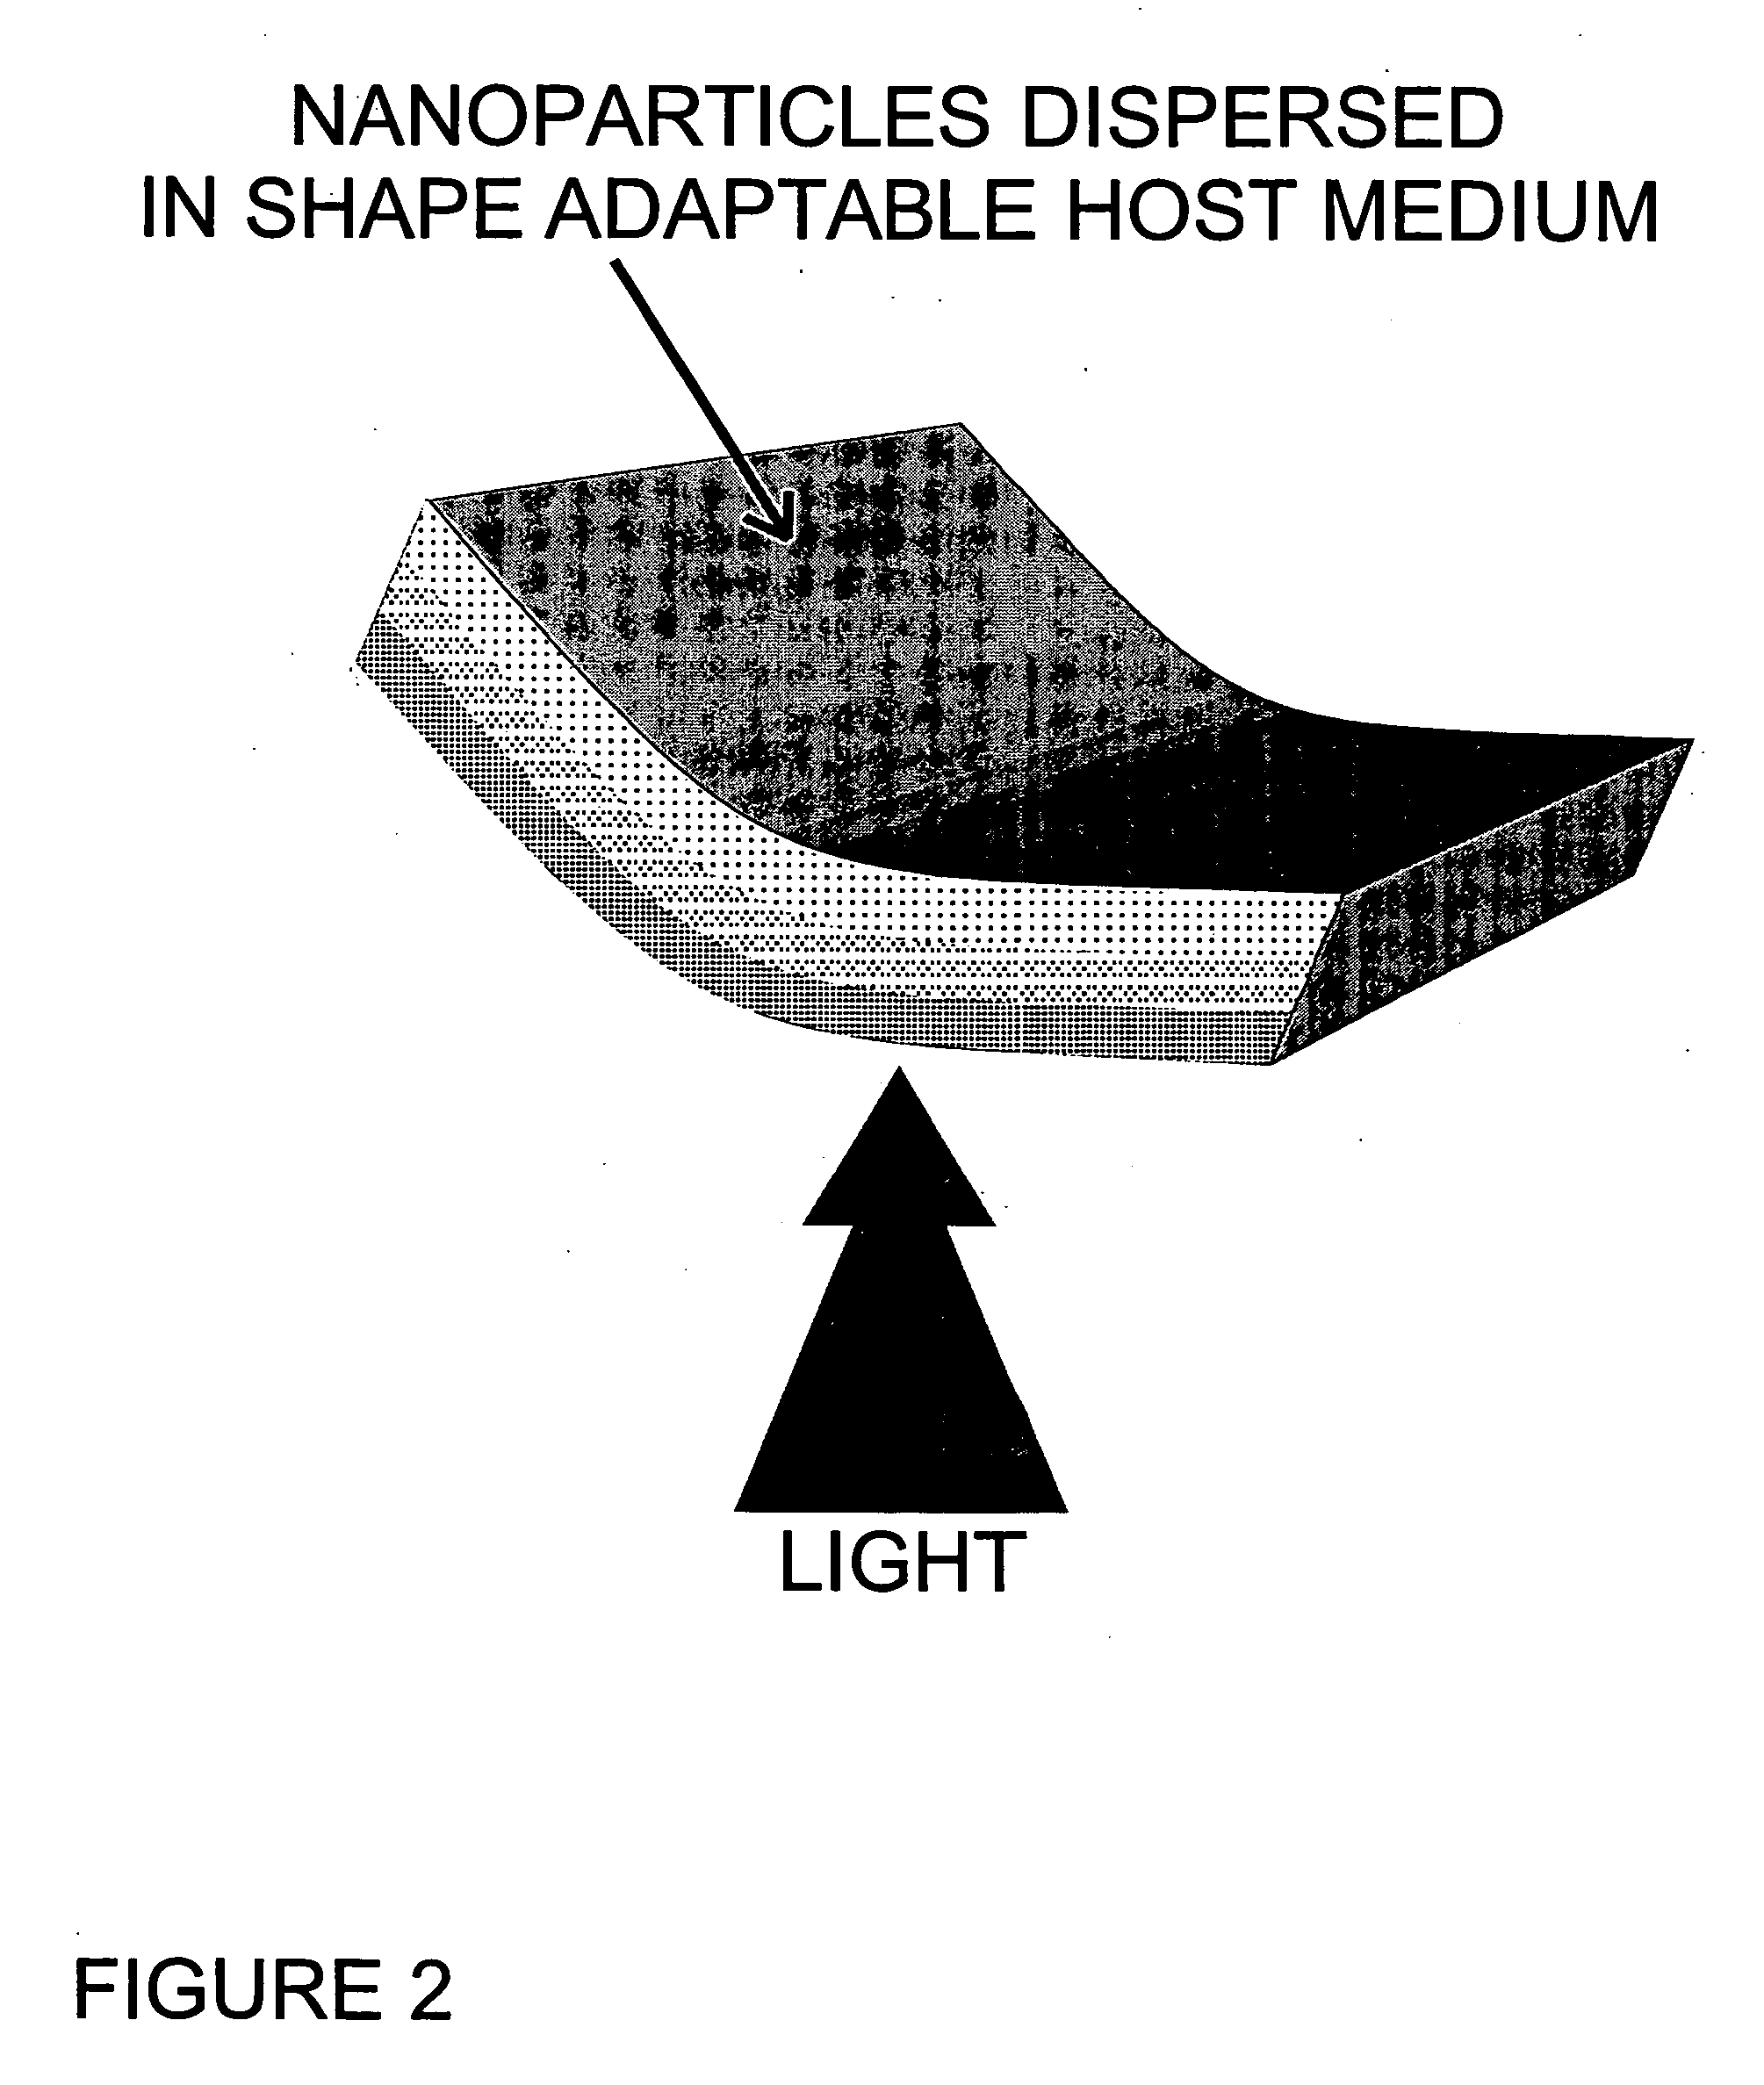 Shape-adaptable and spectral-selective distributed light sources using passive host medium